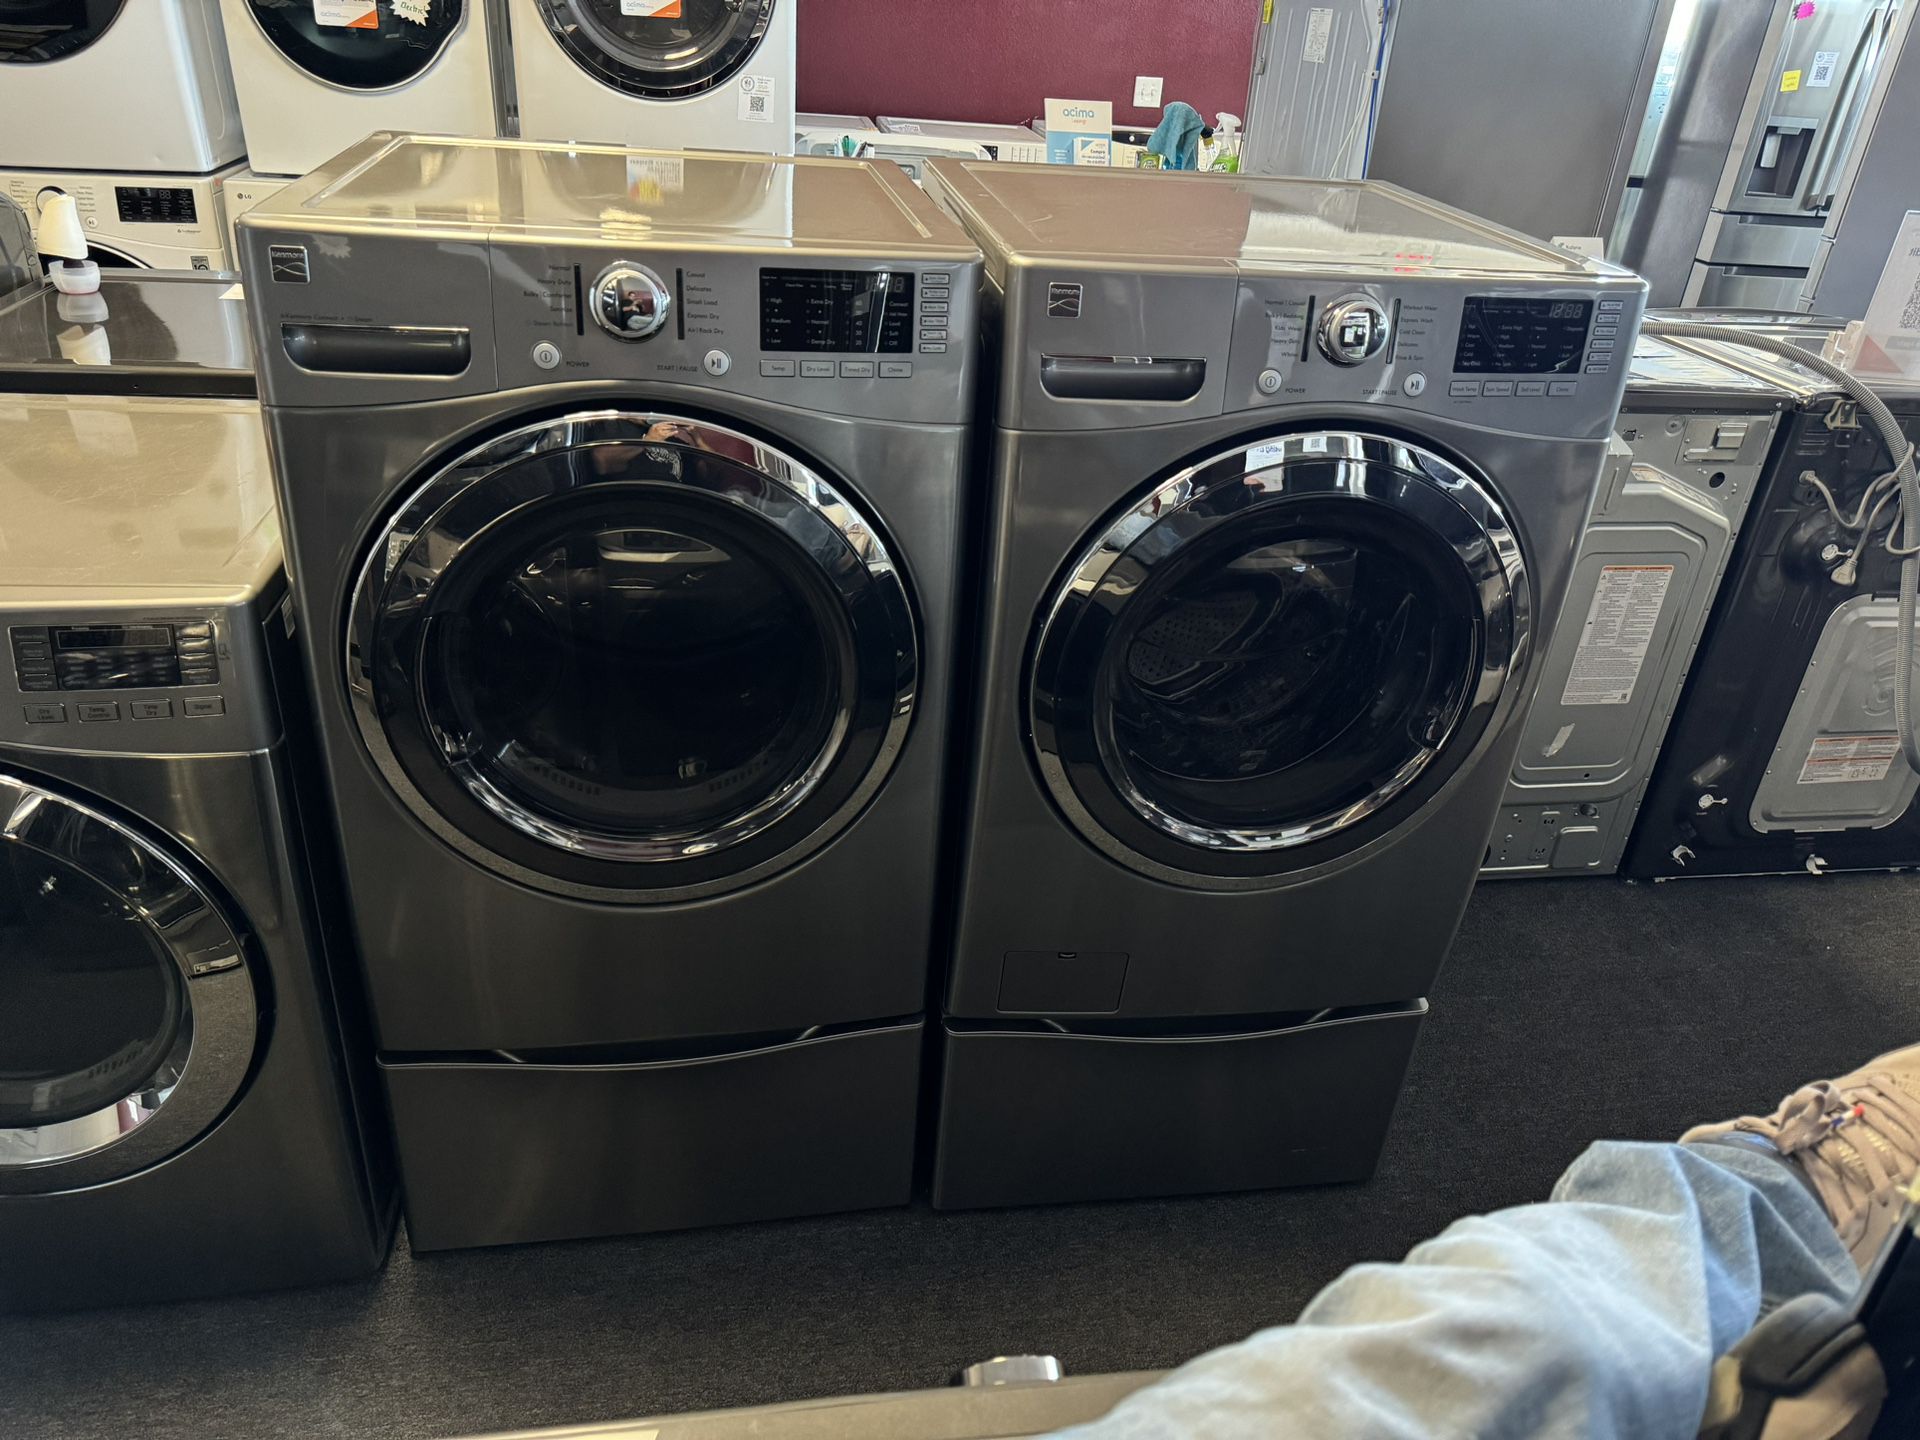 Beautiful Kenmore Washer And Gas Dryer Set